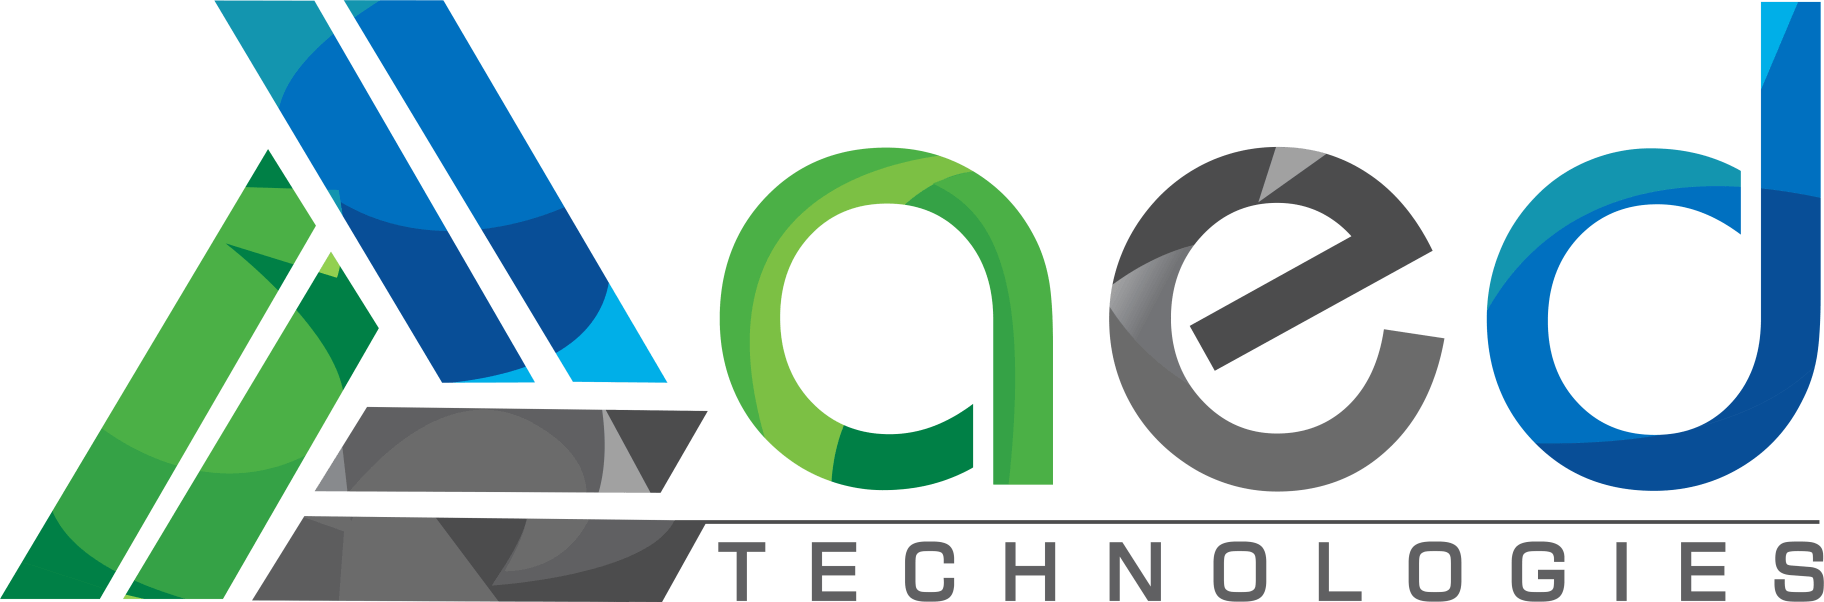 AED Technologies